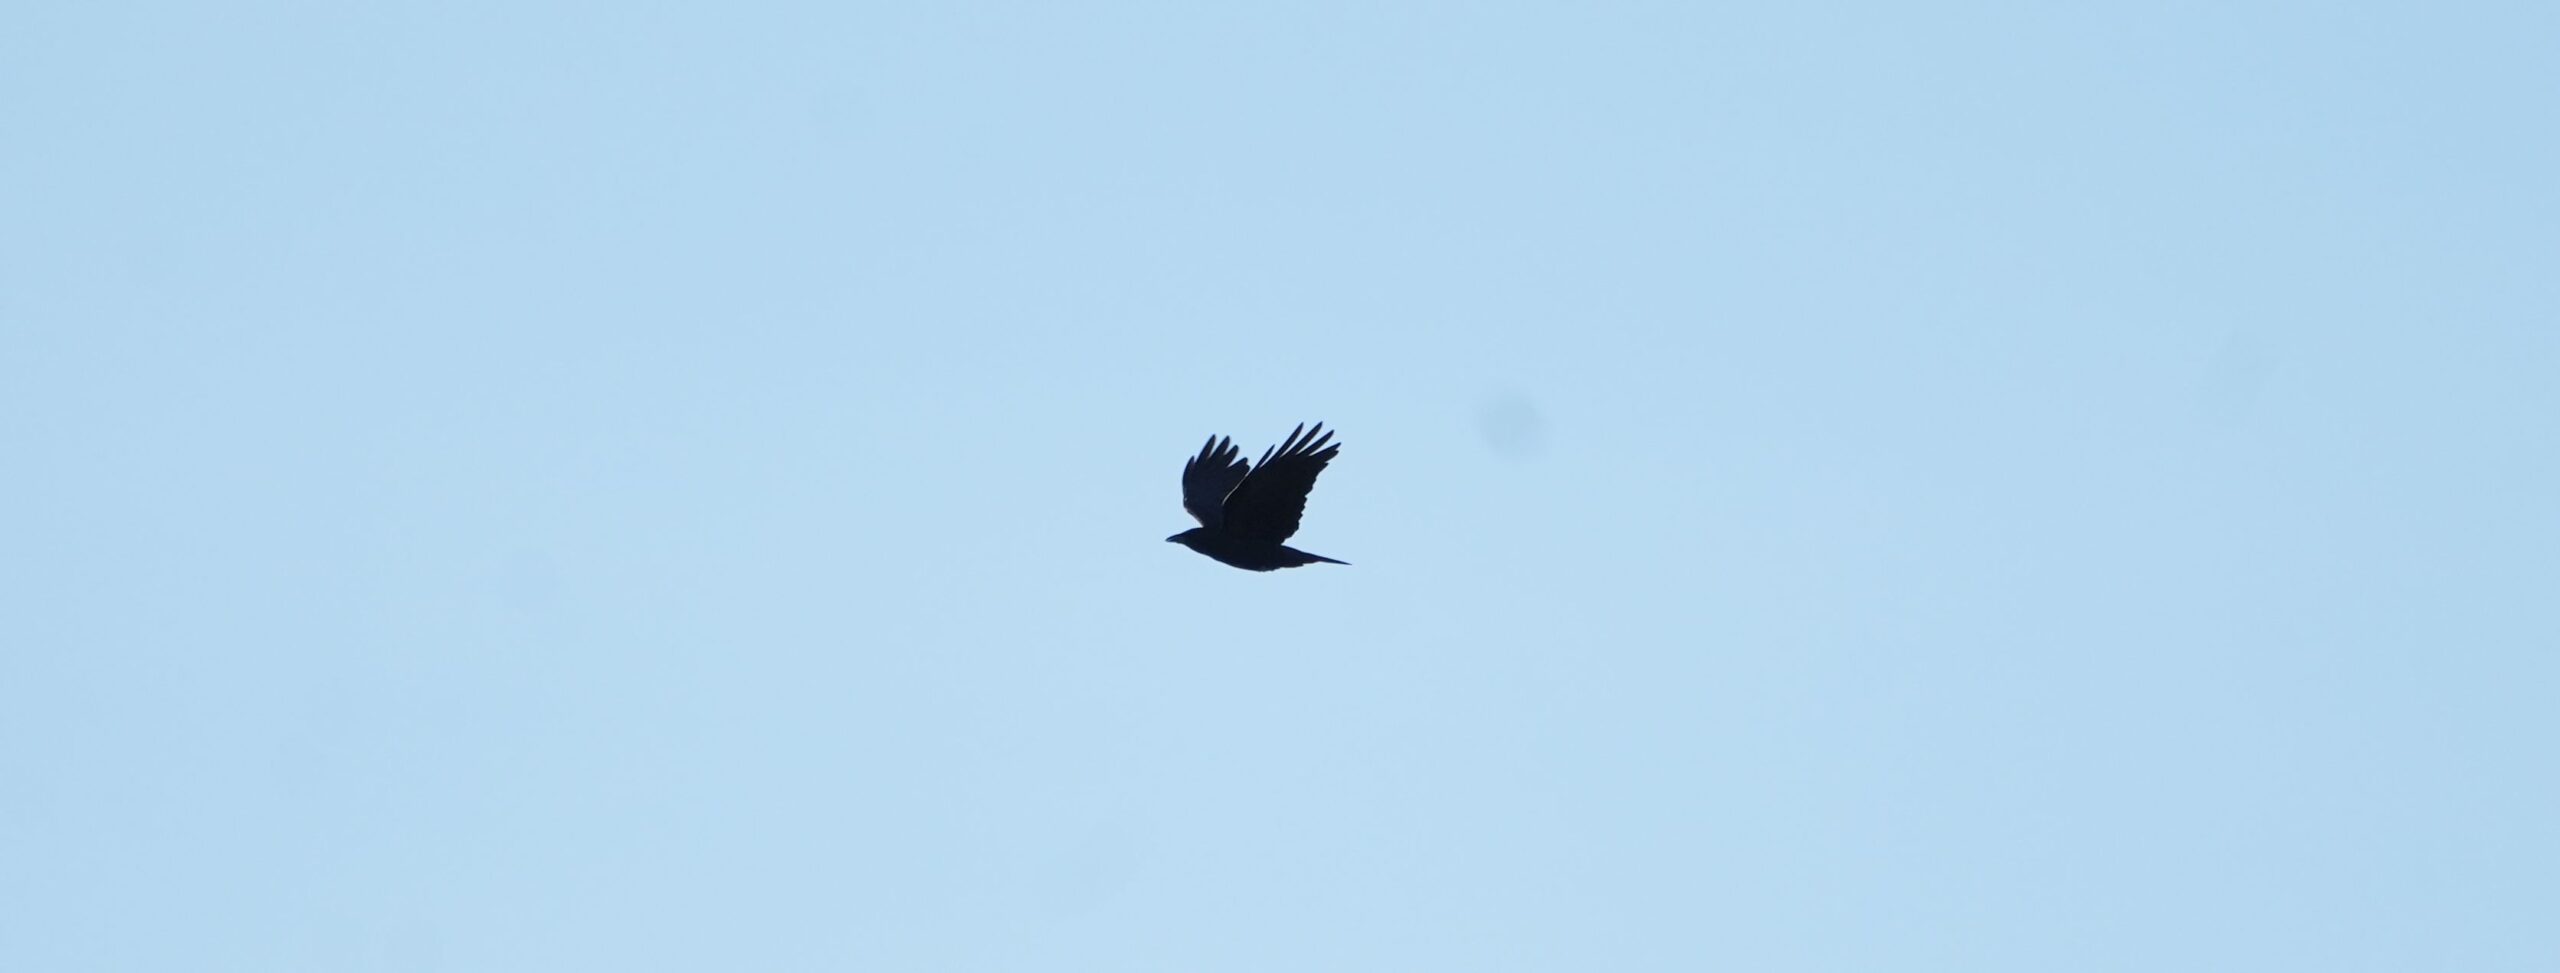 Crow flying with only blue sky in the background